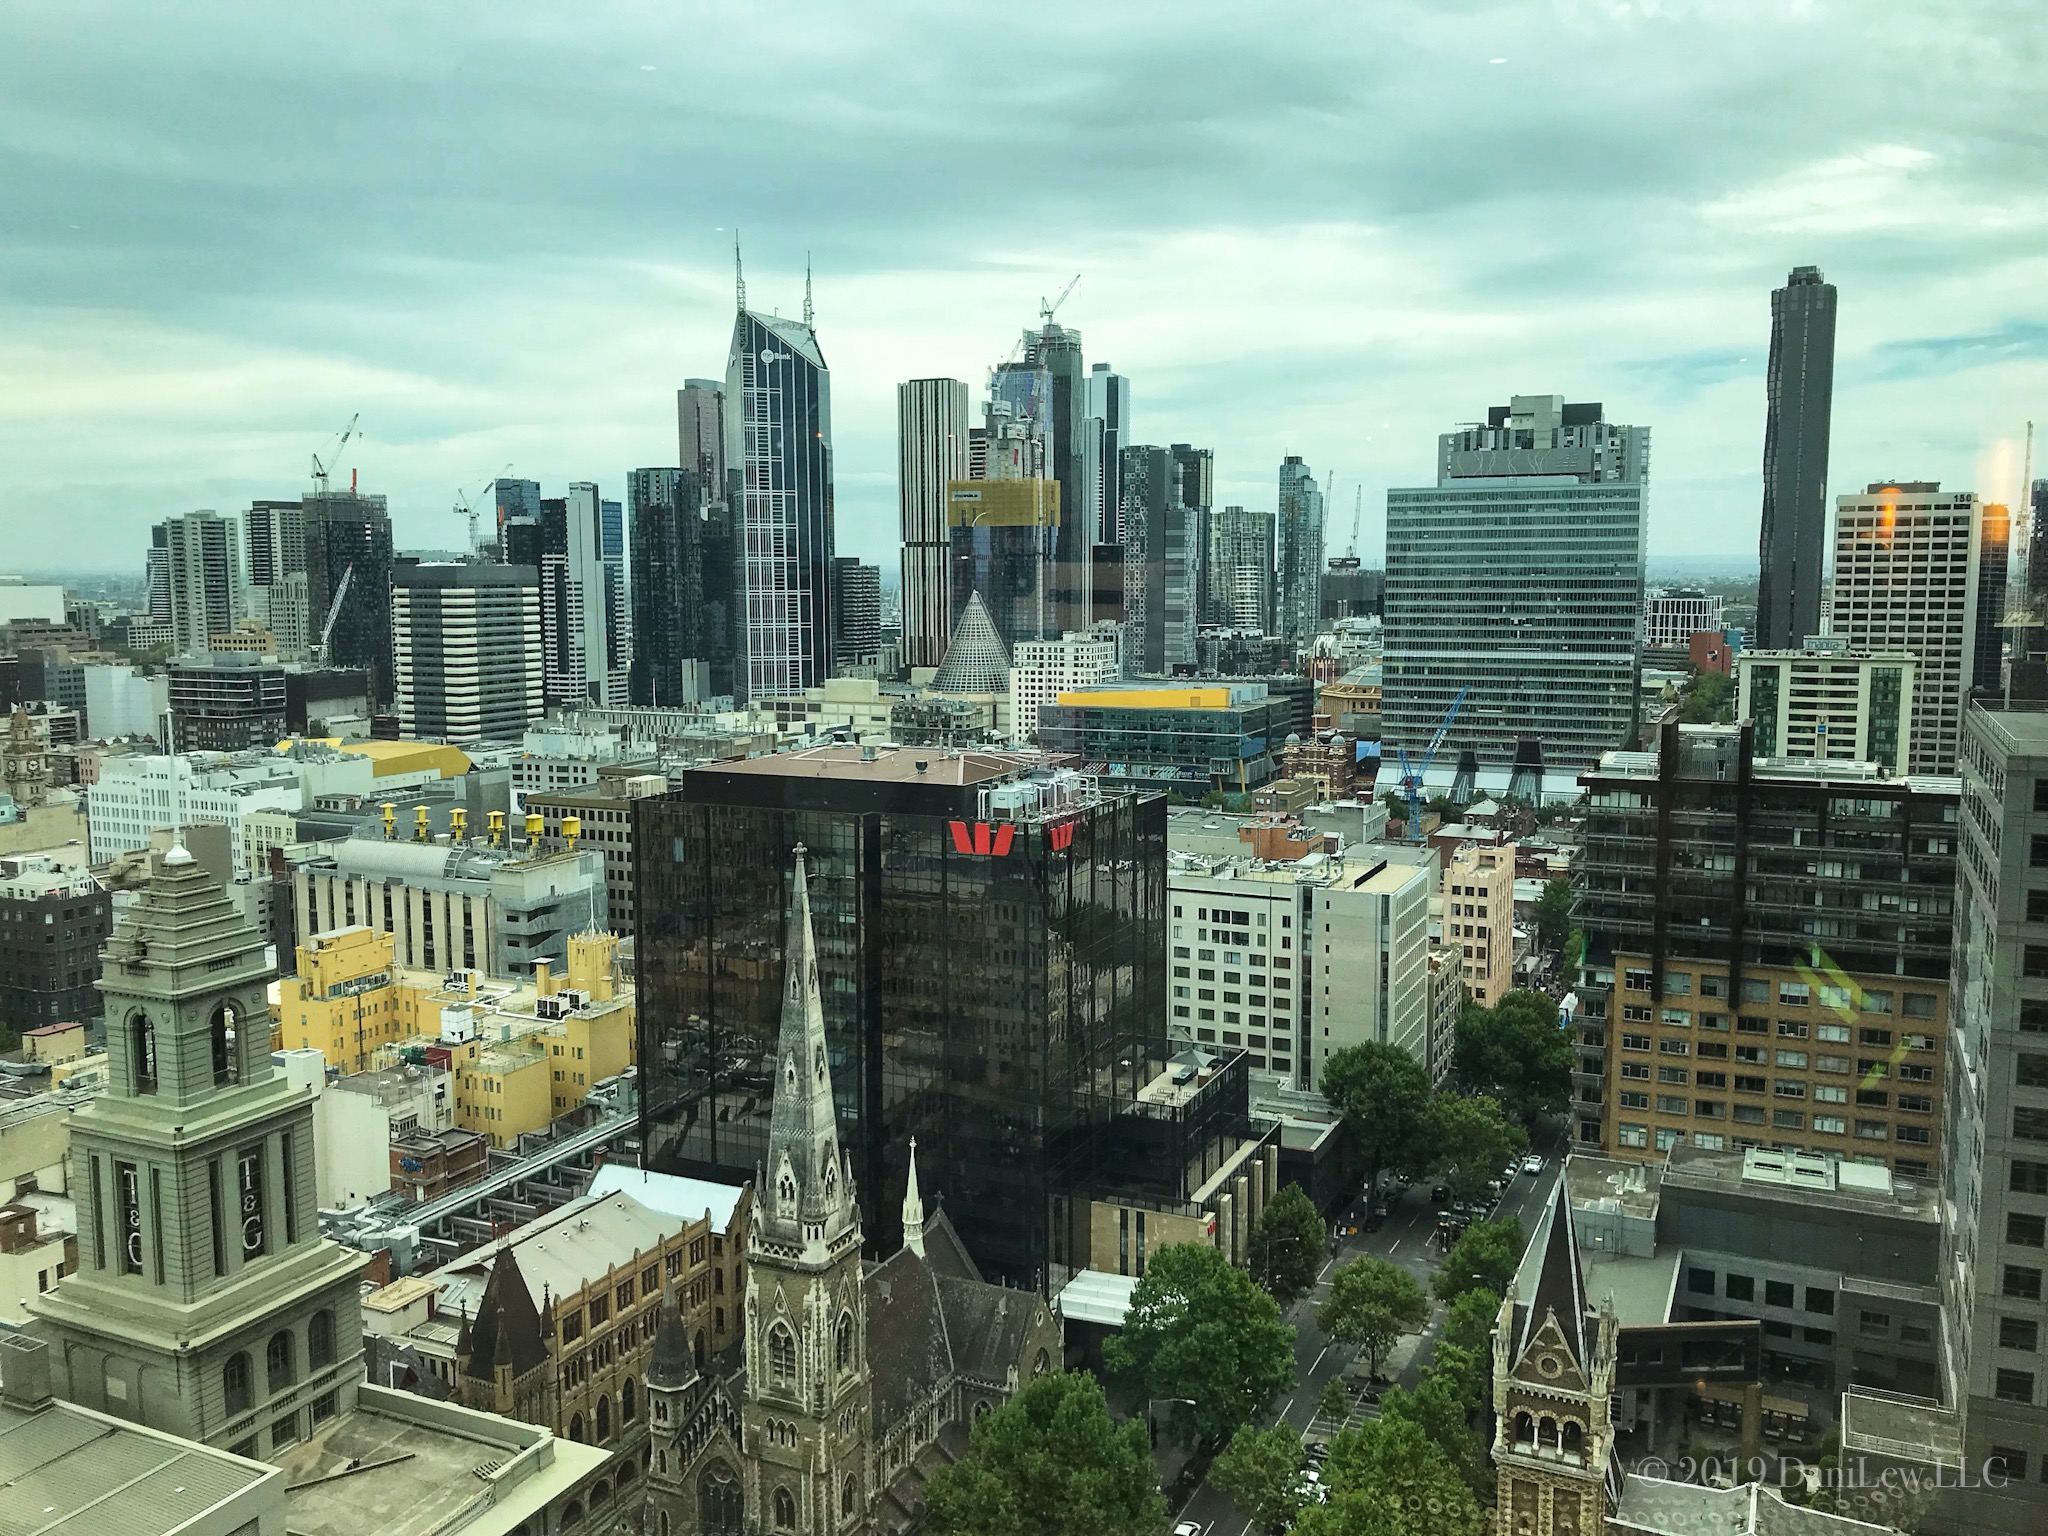 Melbourne Skyline as viewed from the Grand Hyatt - image taken with an iPhone 7